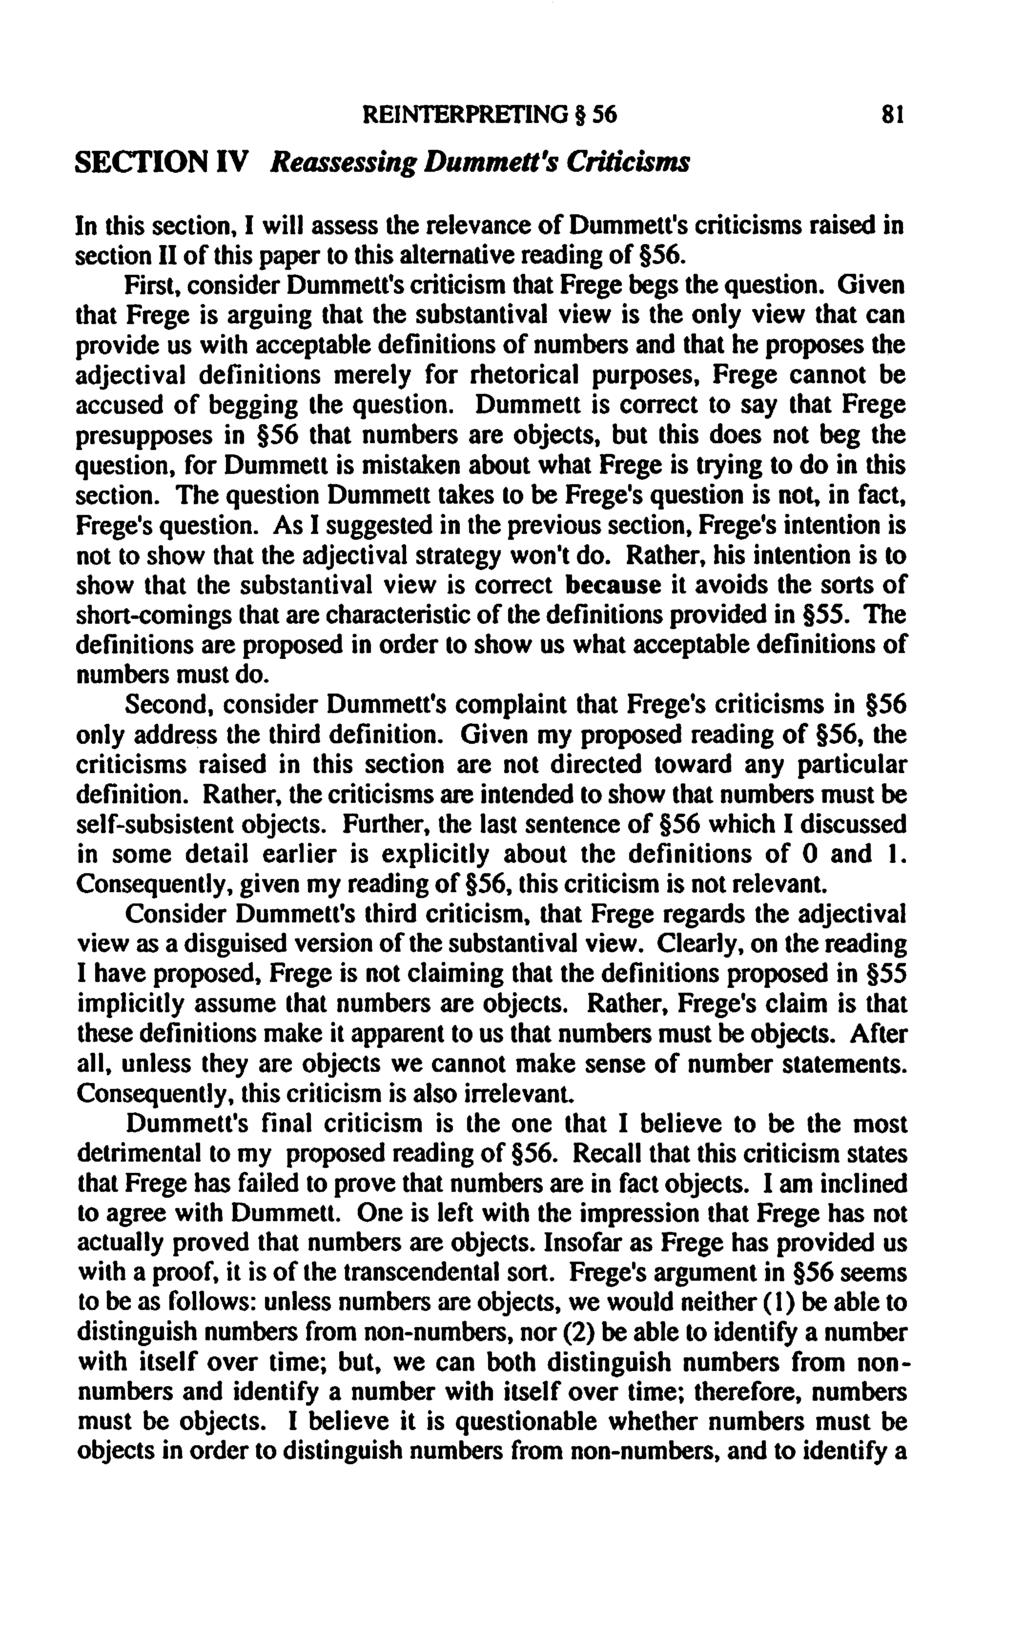 REINTERPRETING 56 81 SECTION IV Reassessing Dummett's Criticisms In this section, I will assess the relevance of Dummett's criticisms raised in section II of this paper to this alternative reading of